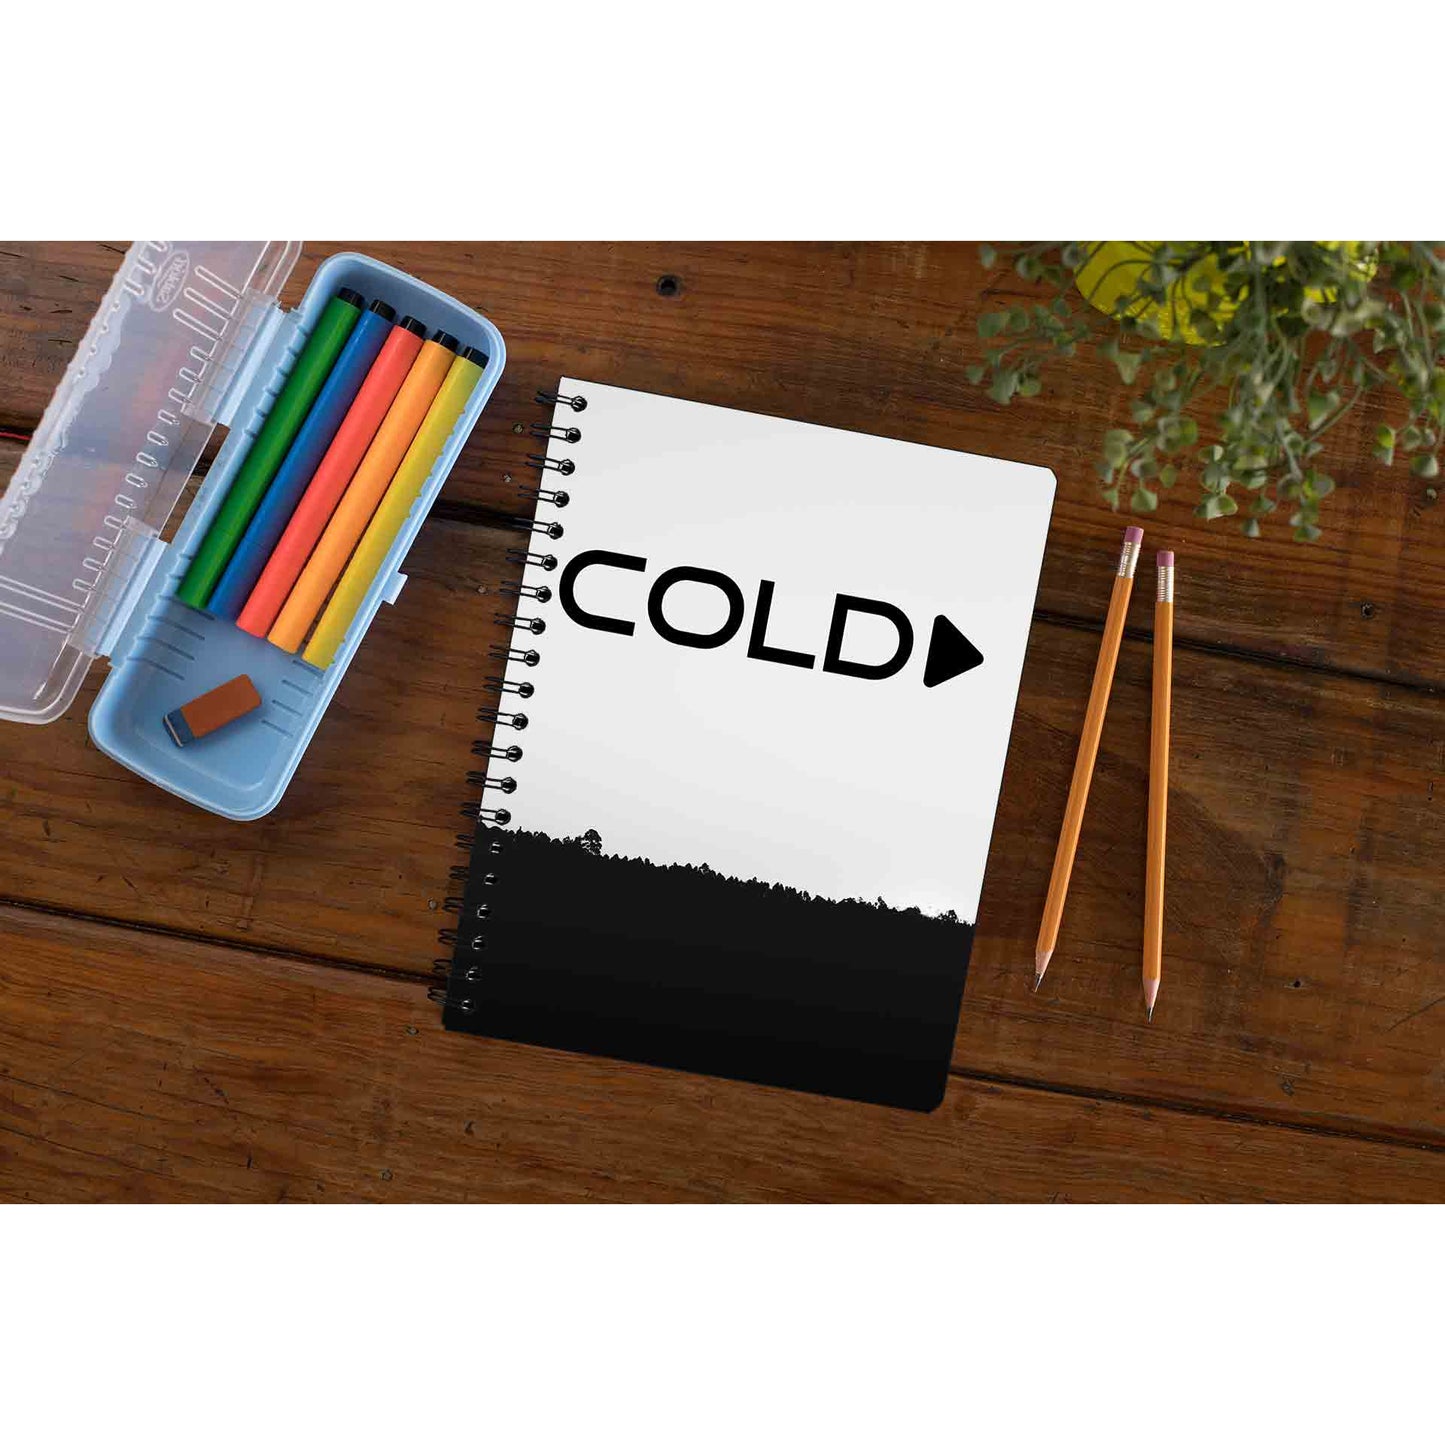 coldplay play notebook notepad diary buy online india the banyan tee tbt unruled